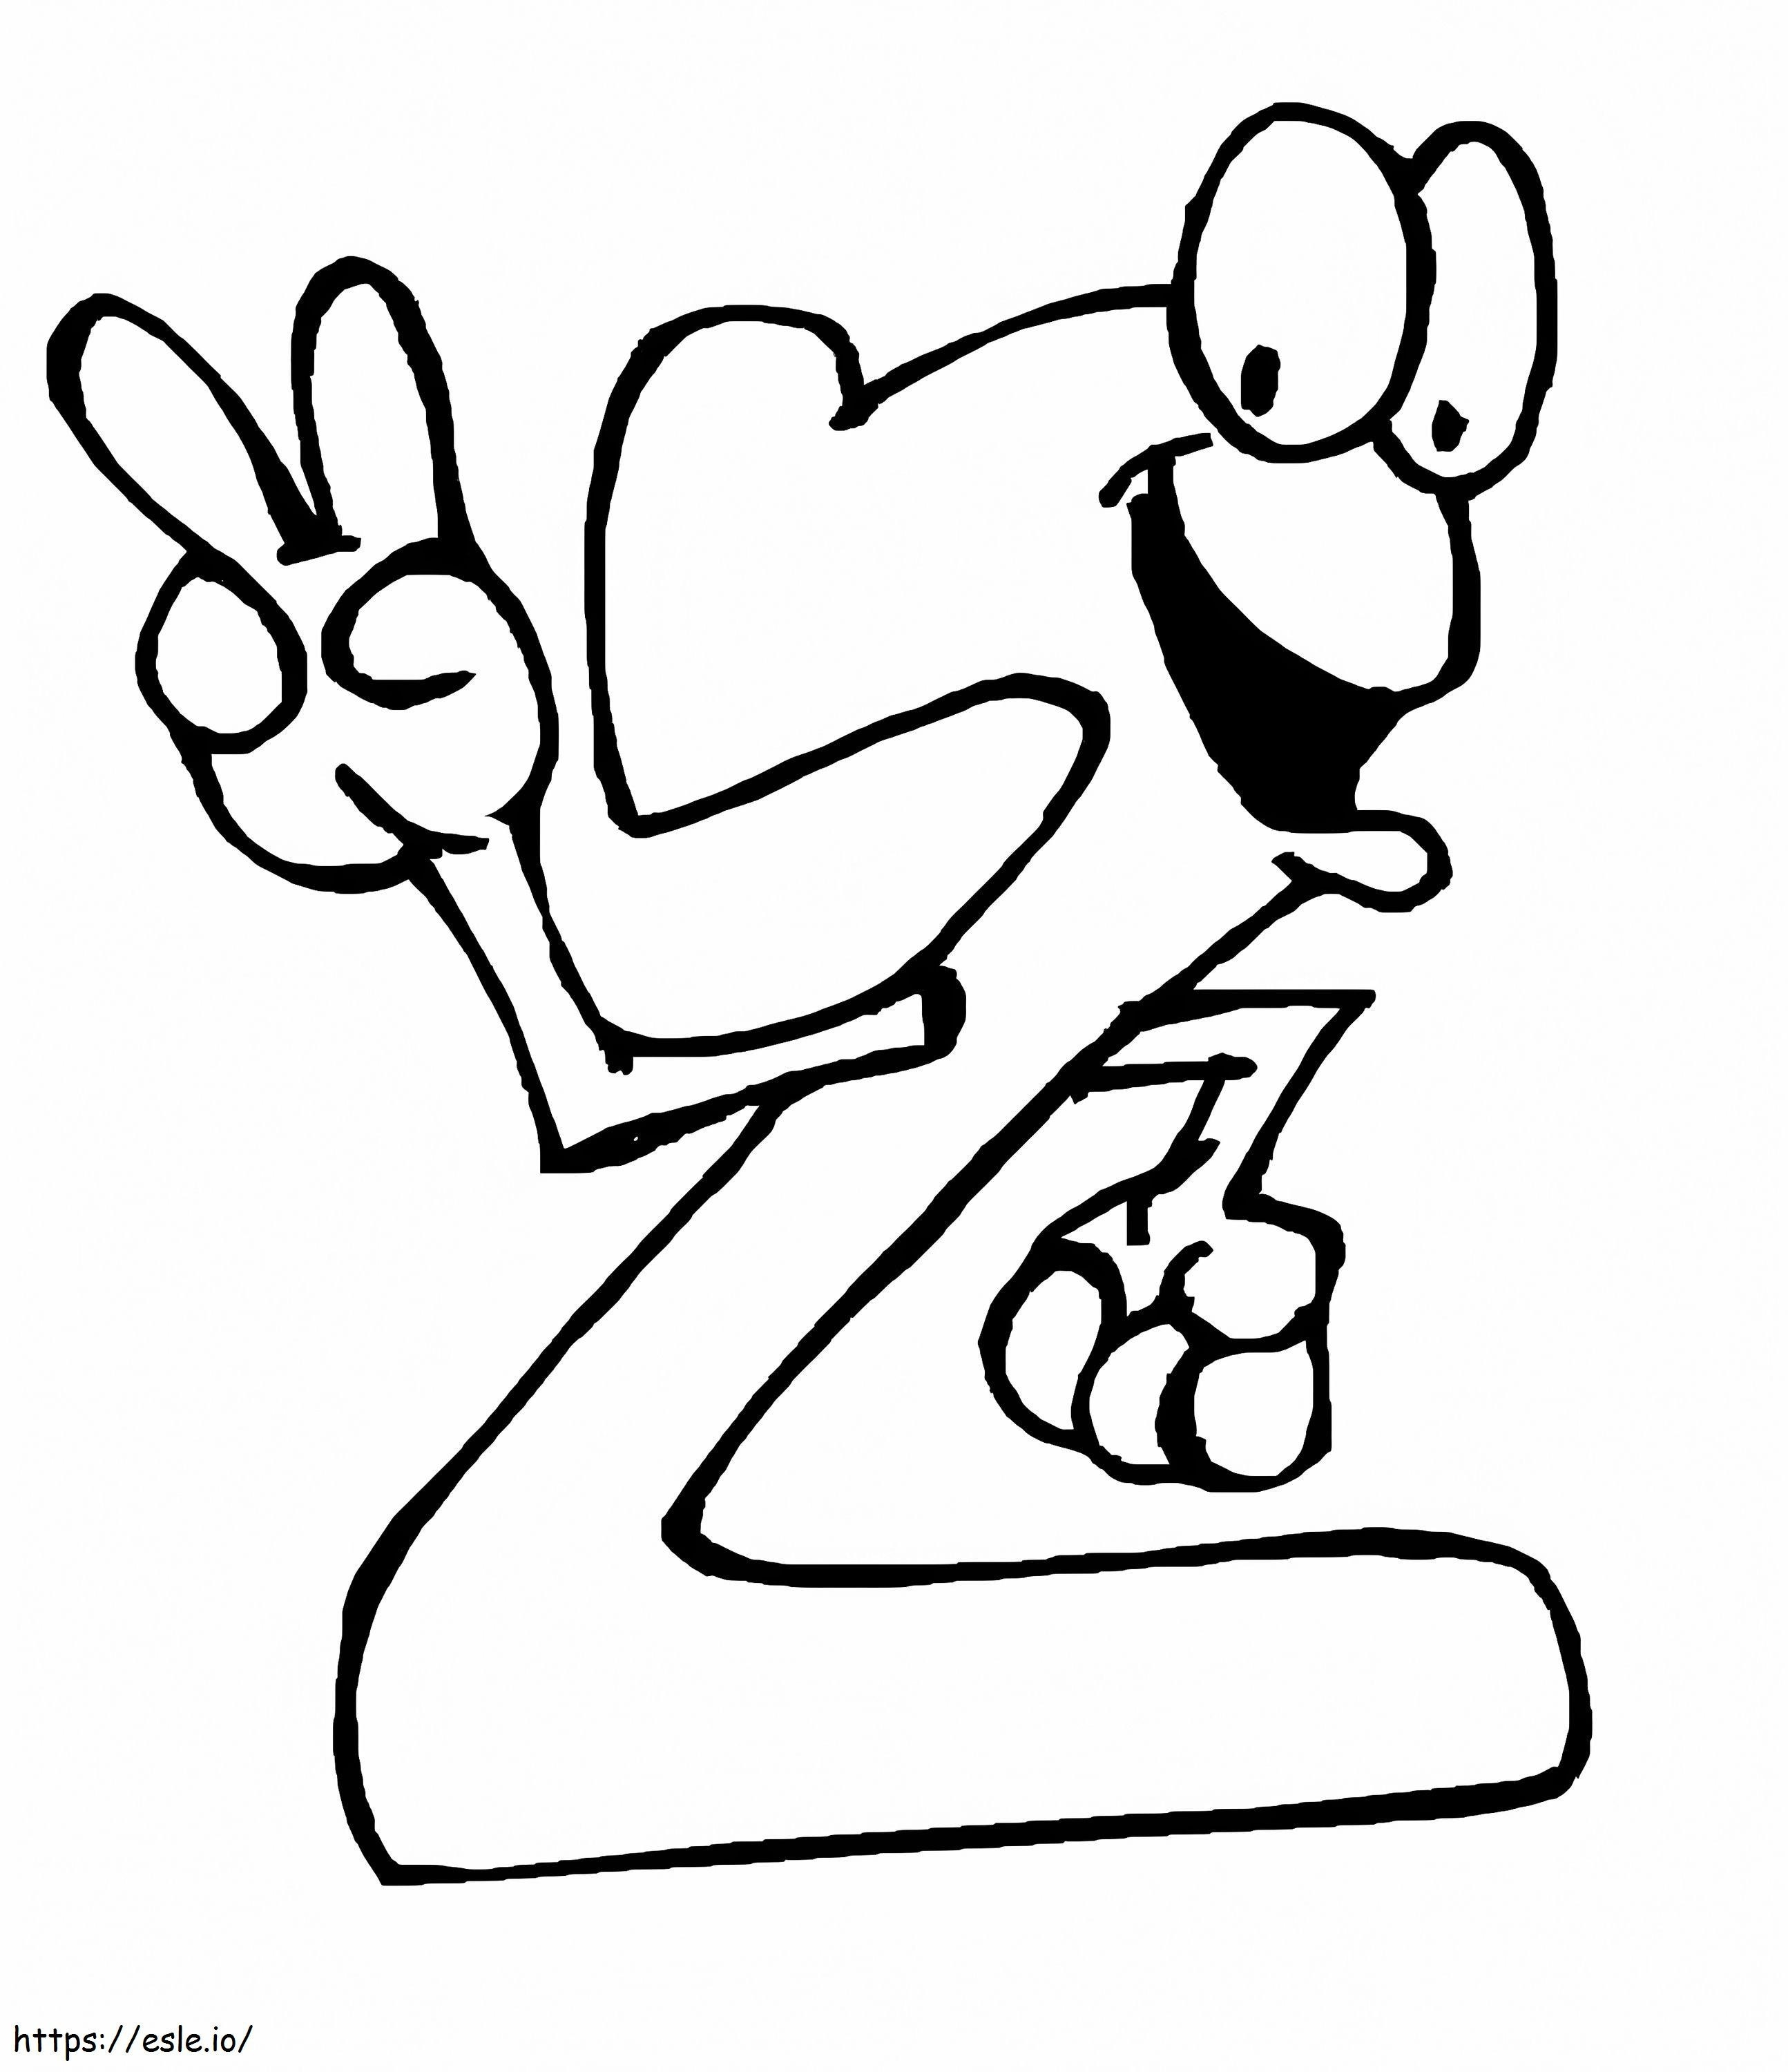 Cartoon Number 2 coloring page